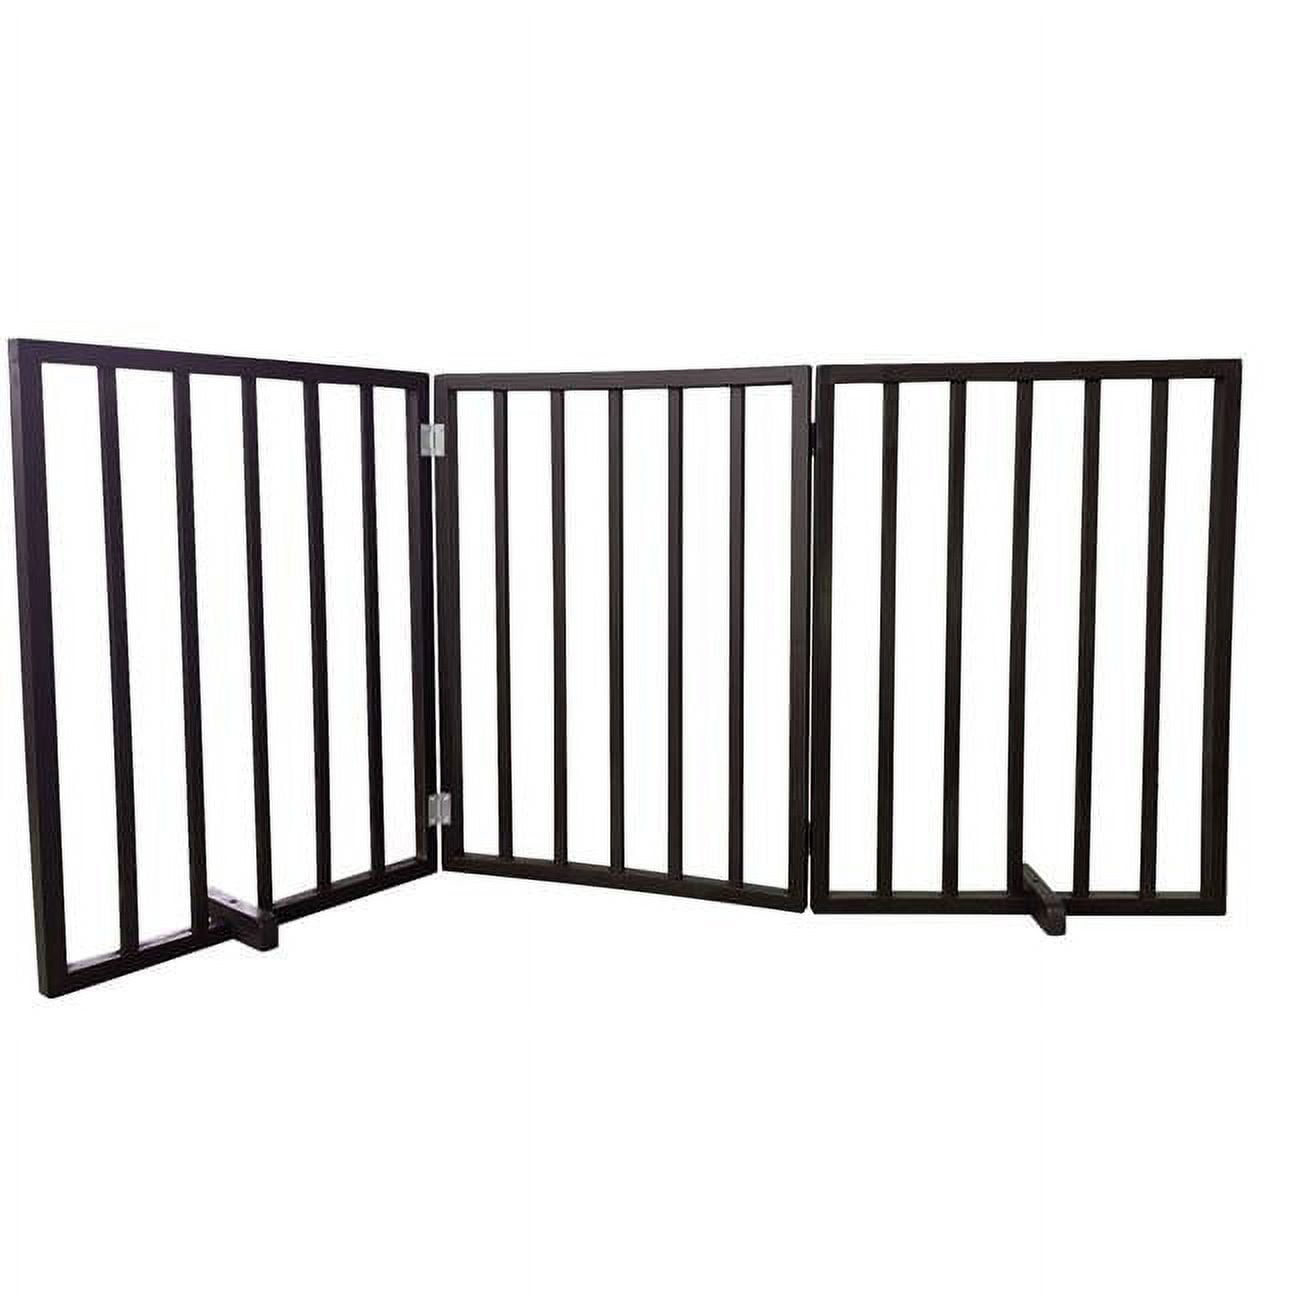 Picture of AmeriHome WFPGB3 54 in. Freestanding 3-Panel Folding Wood Pet Gate - Brown